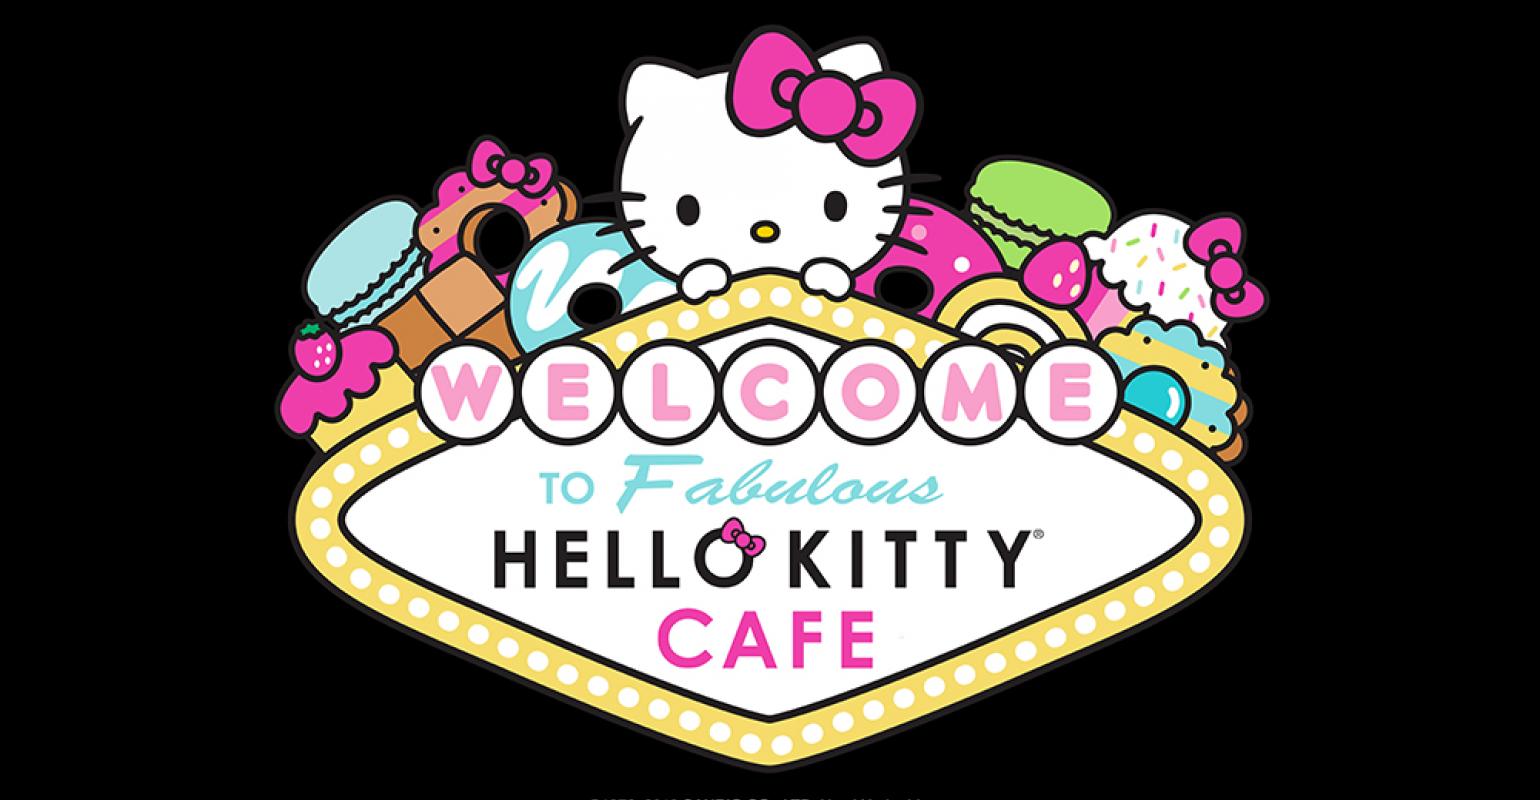 Hello Kitty Cafe Located in New York-New York Hotel and Casino in